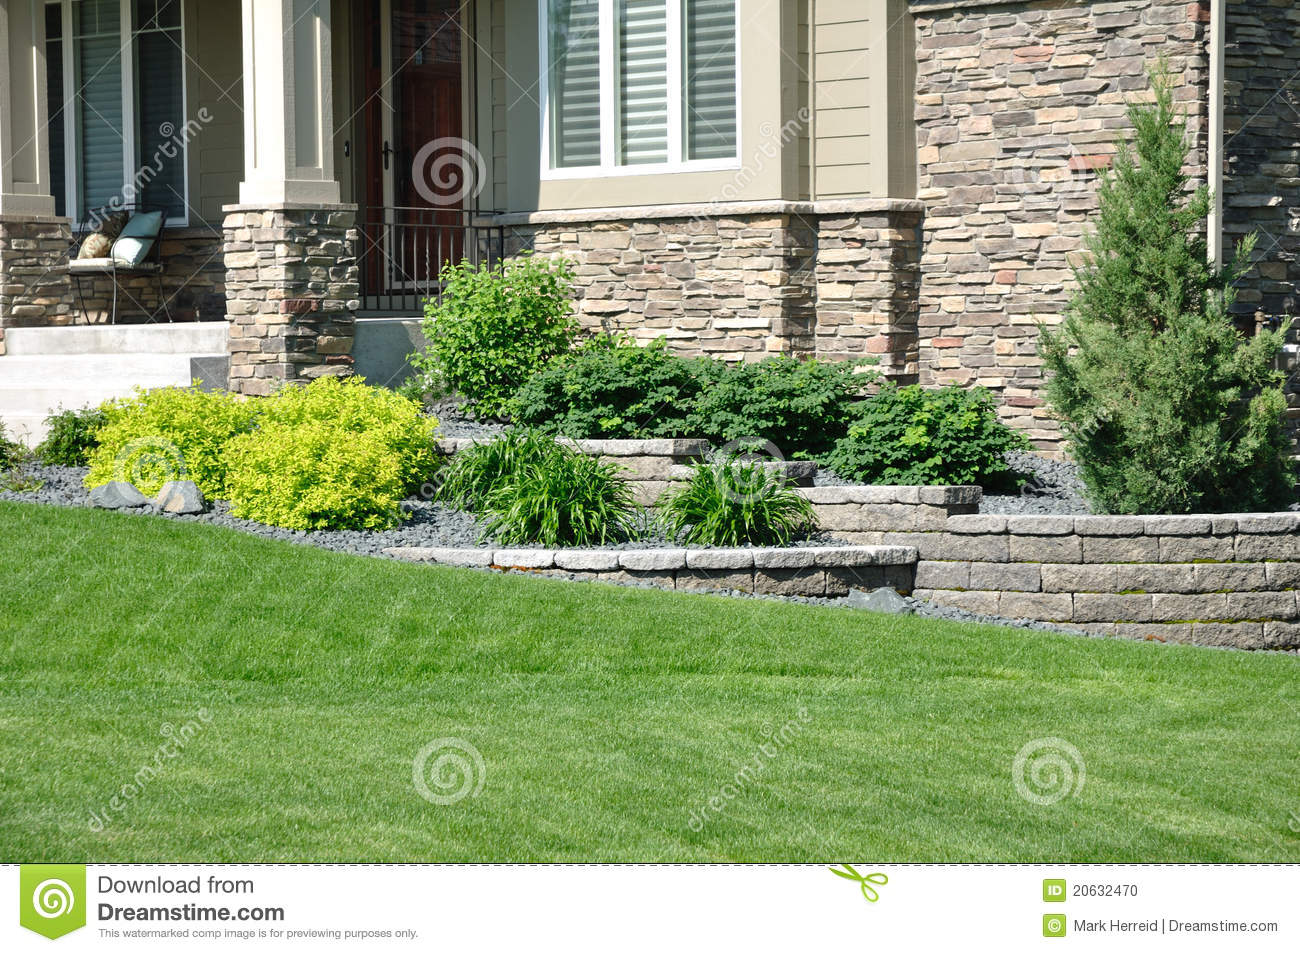 Landscaping And Retaining Wall Stock Photo   Image  20632470